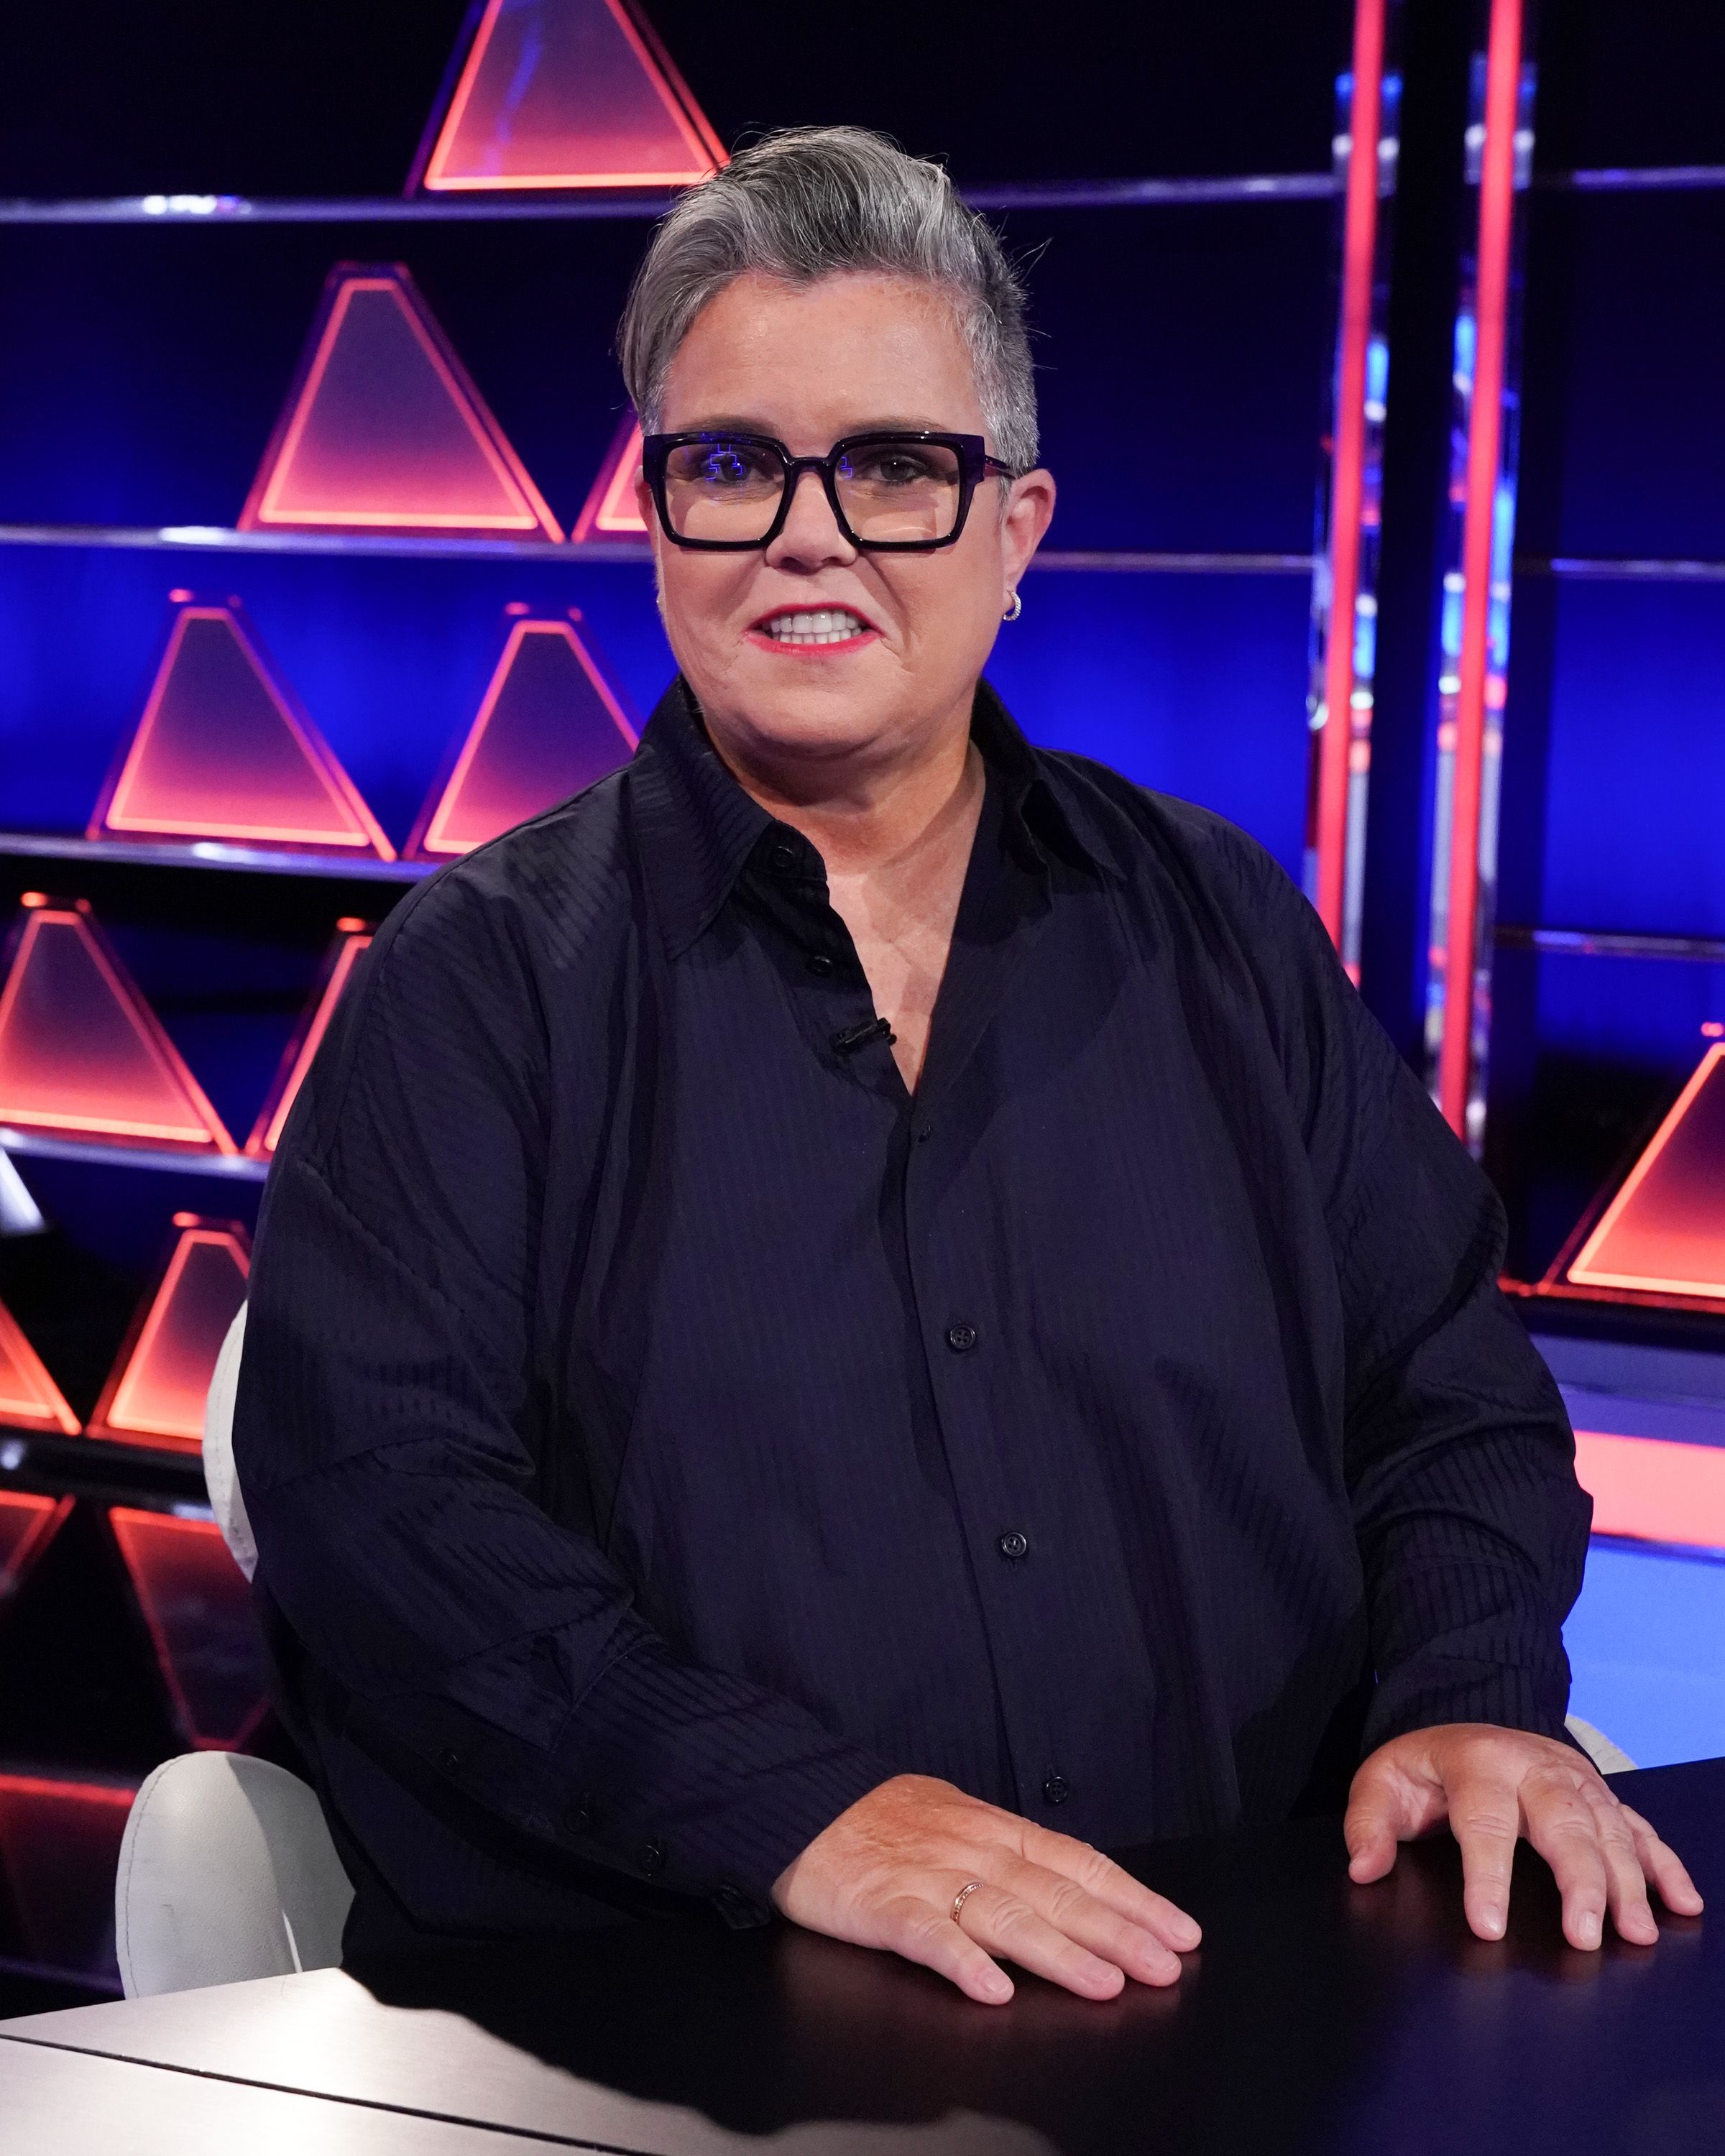 Rosie O'Donnell during ABC's "The $100,000 Pyramid" Season Five. | Source: Getty Images